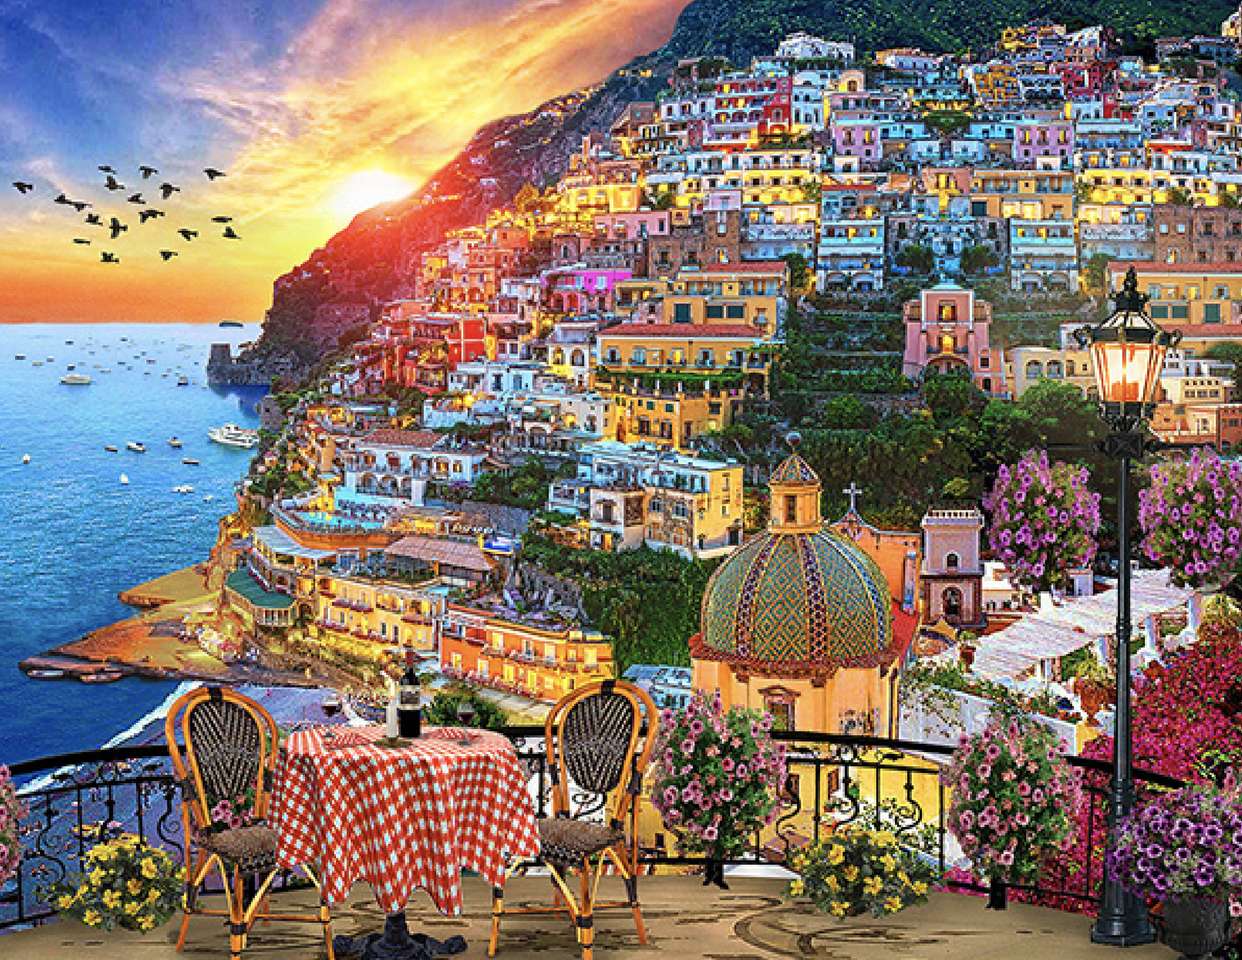 Italy-Positano a fairytale town on the slope of the mountains, a miracle online puzzle